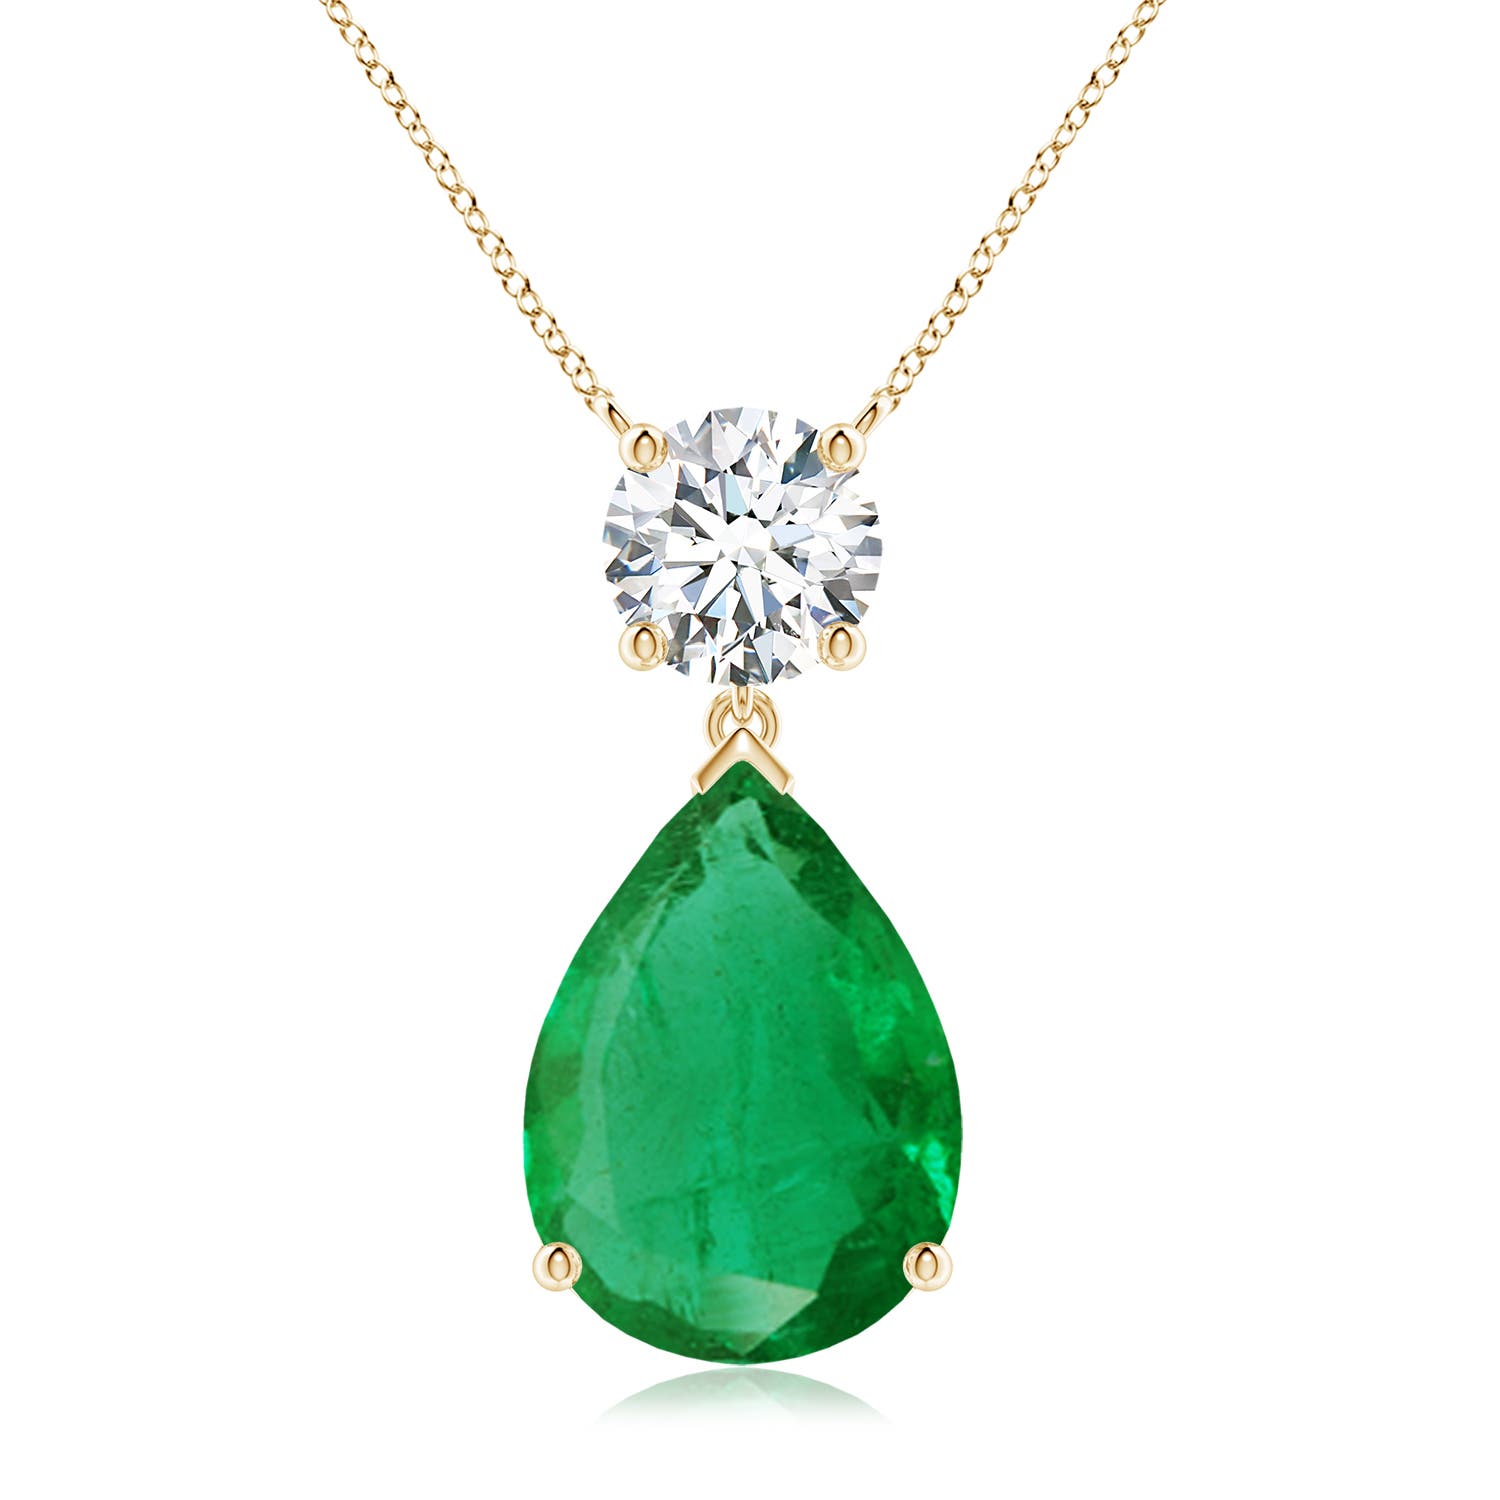 AA - Emerald / 7.6 CT / 14 KT Yellow Gold